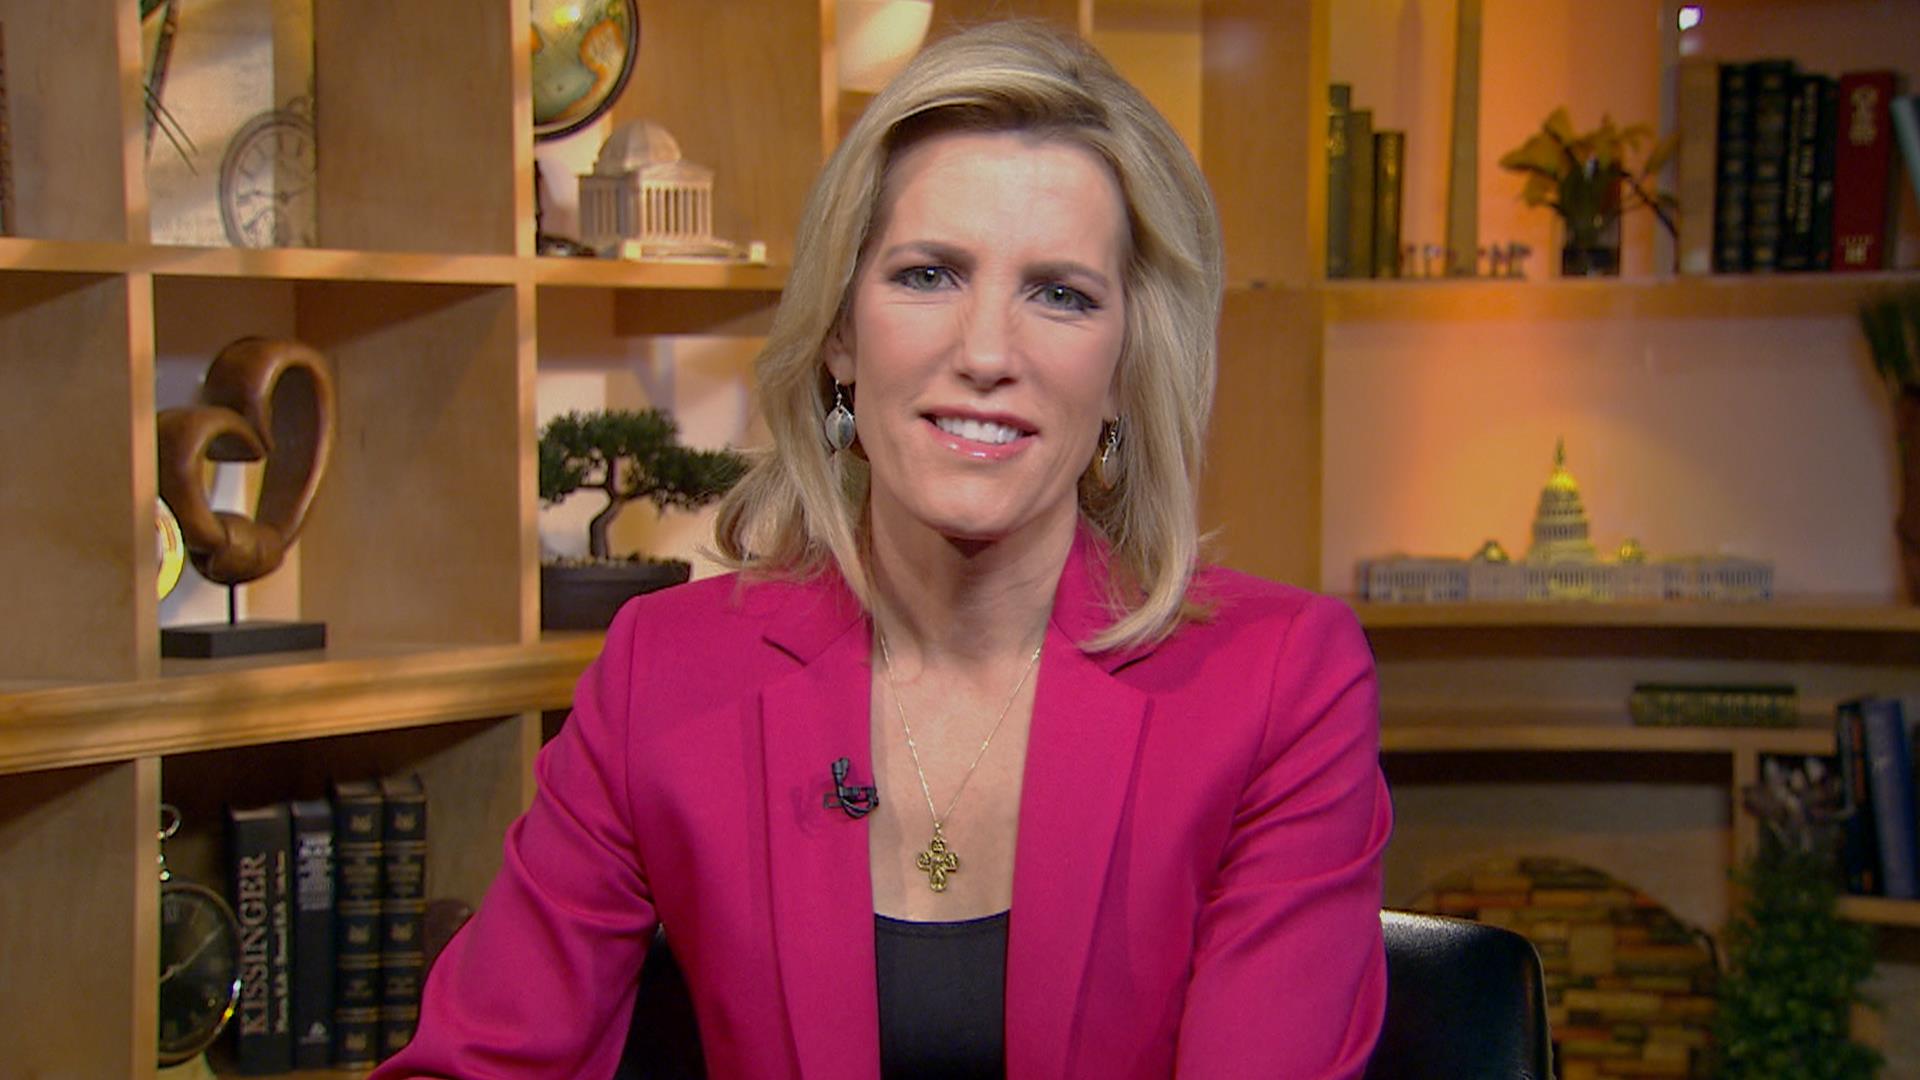 Laura Ingraham: It's a privilege to be considered for Trump press secretary